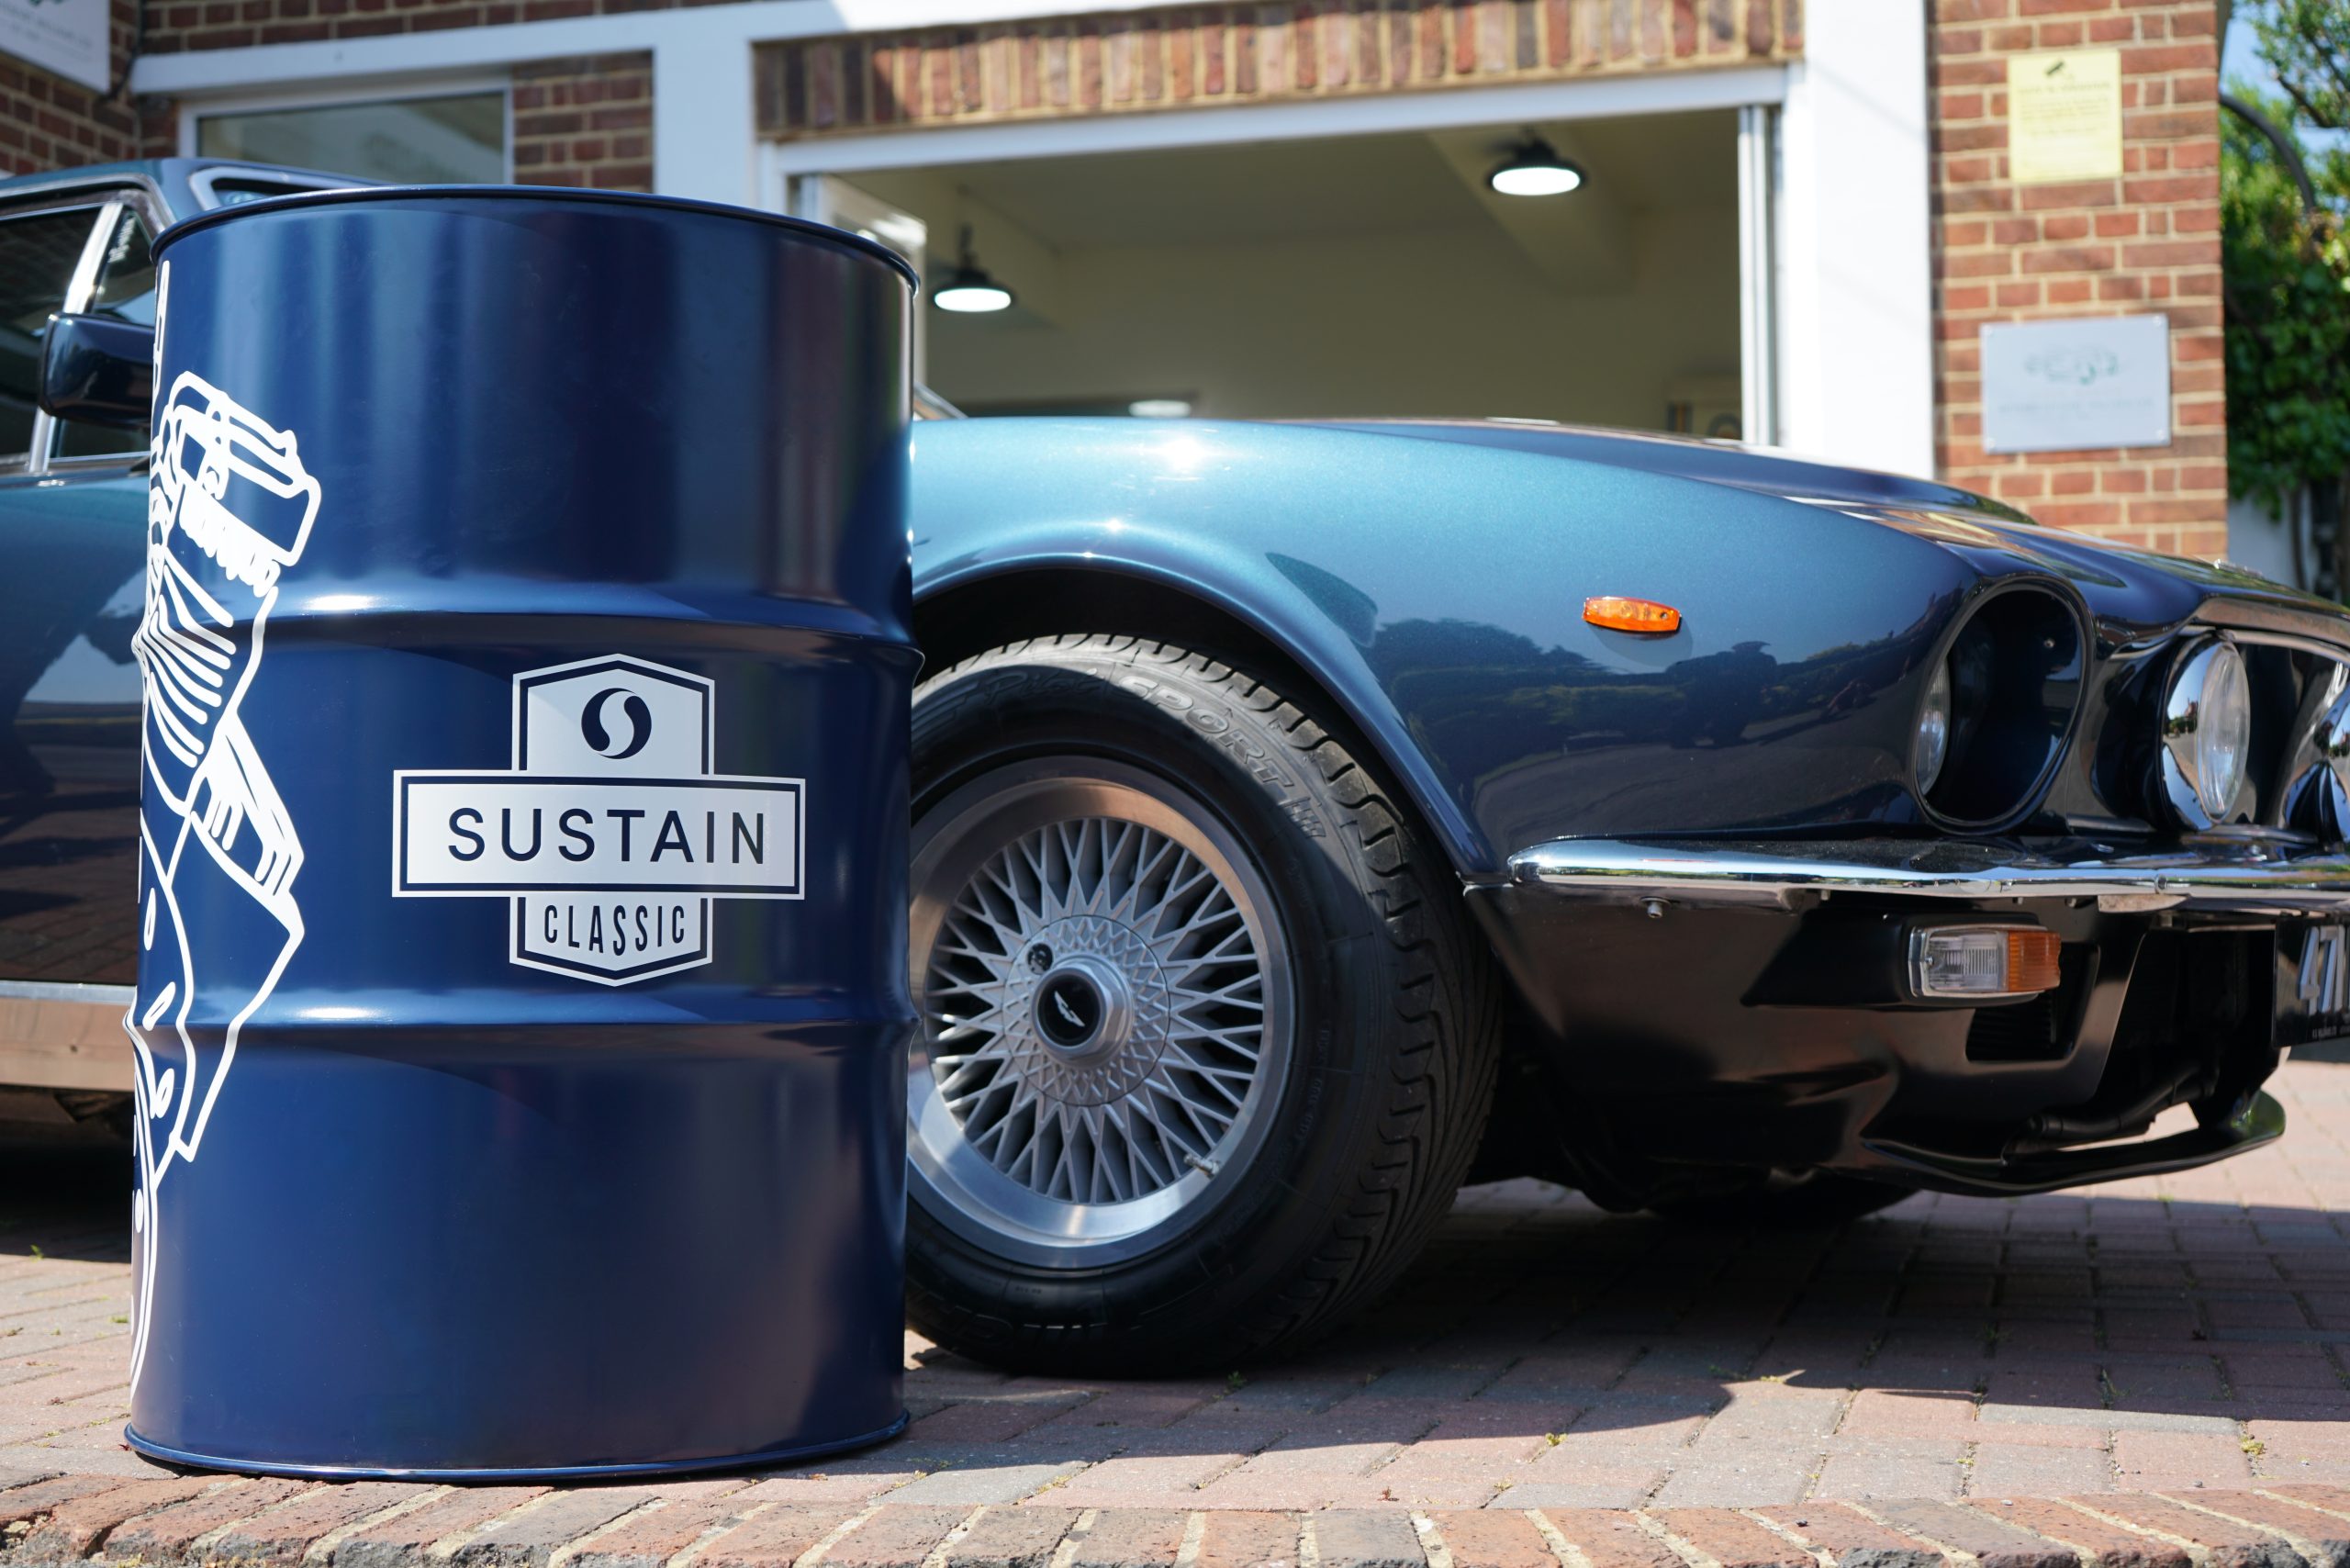 The first sustainable fuel for classic cars is now on sale, but there’s a catch